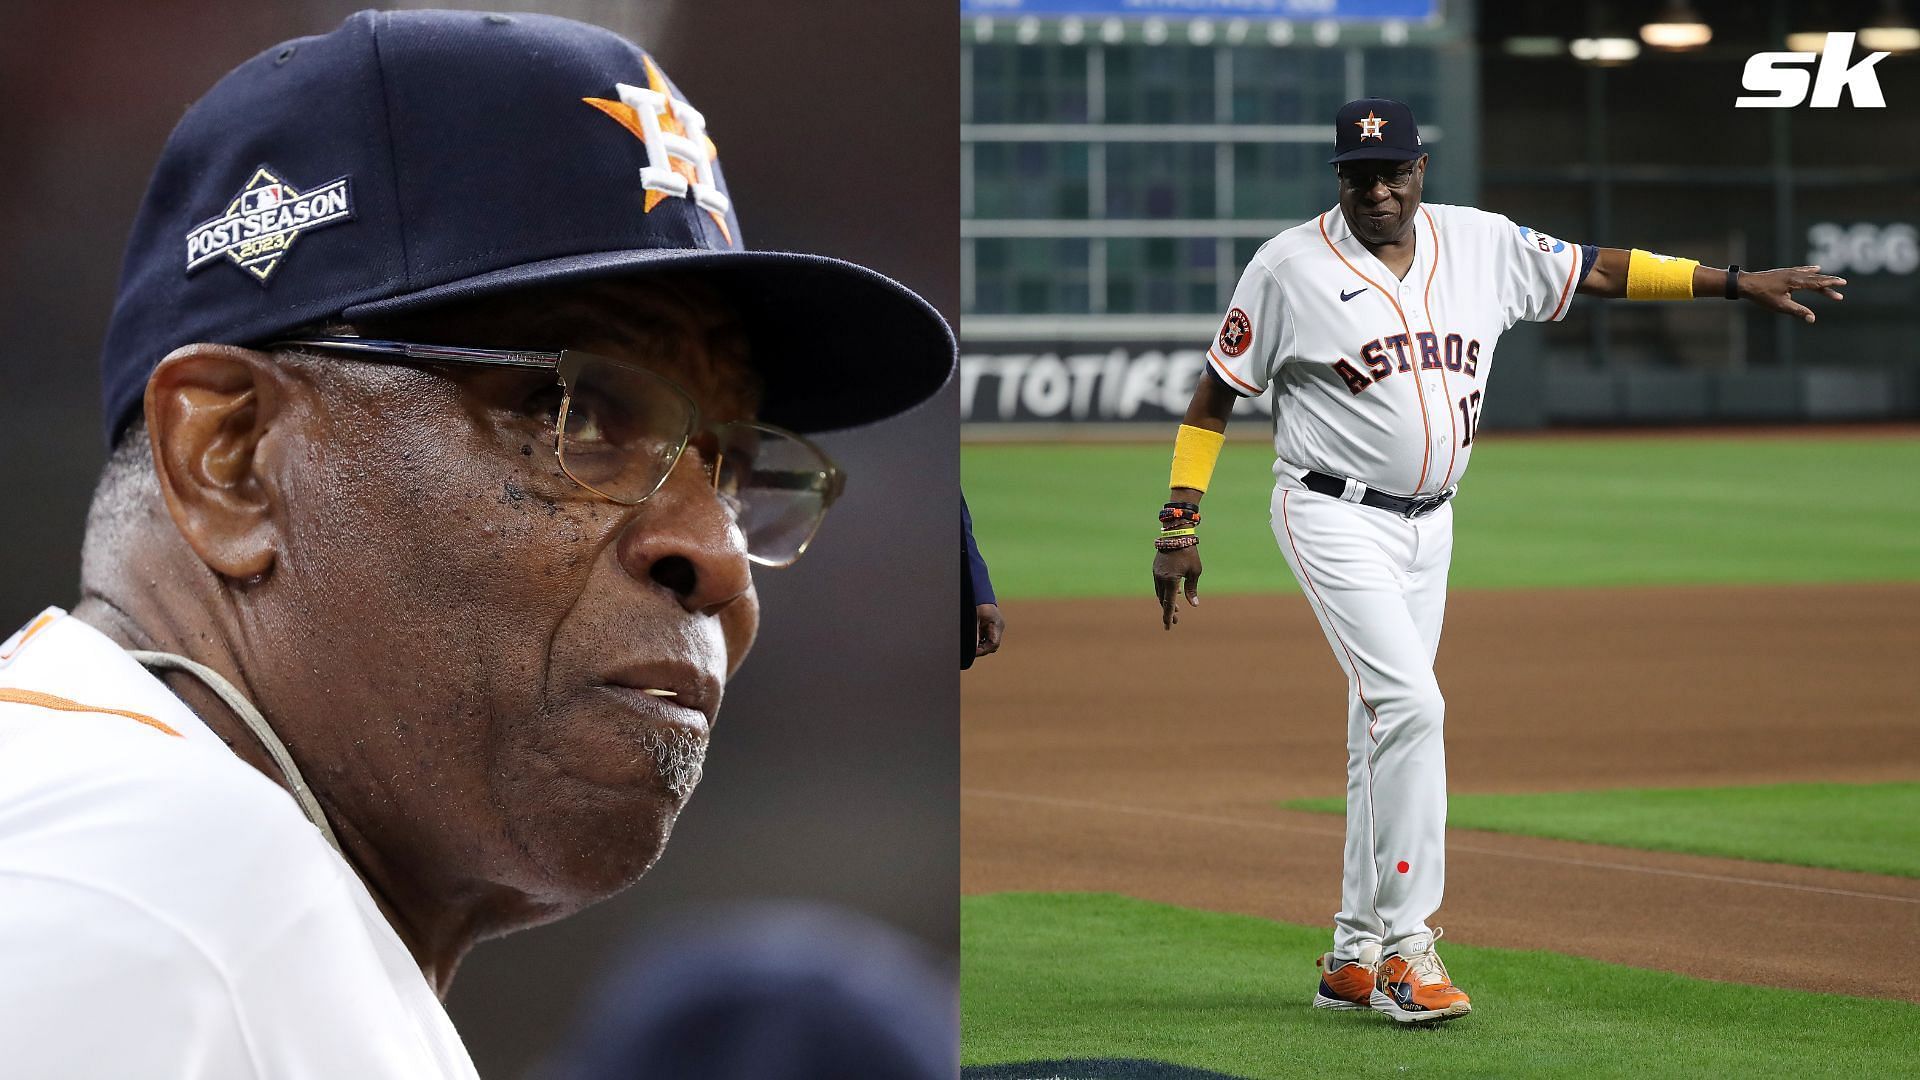 Former Astros manager Dusty Baker was given Baseball Digest